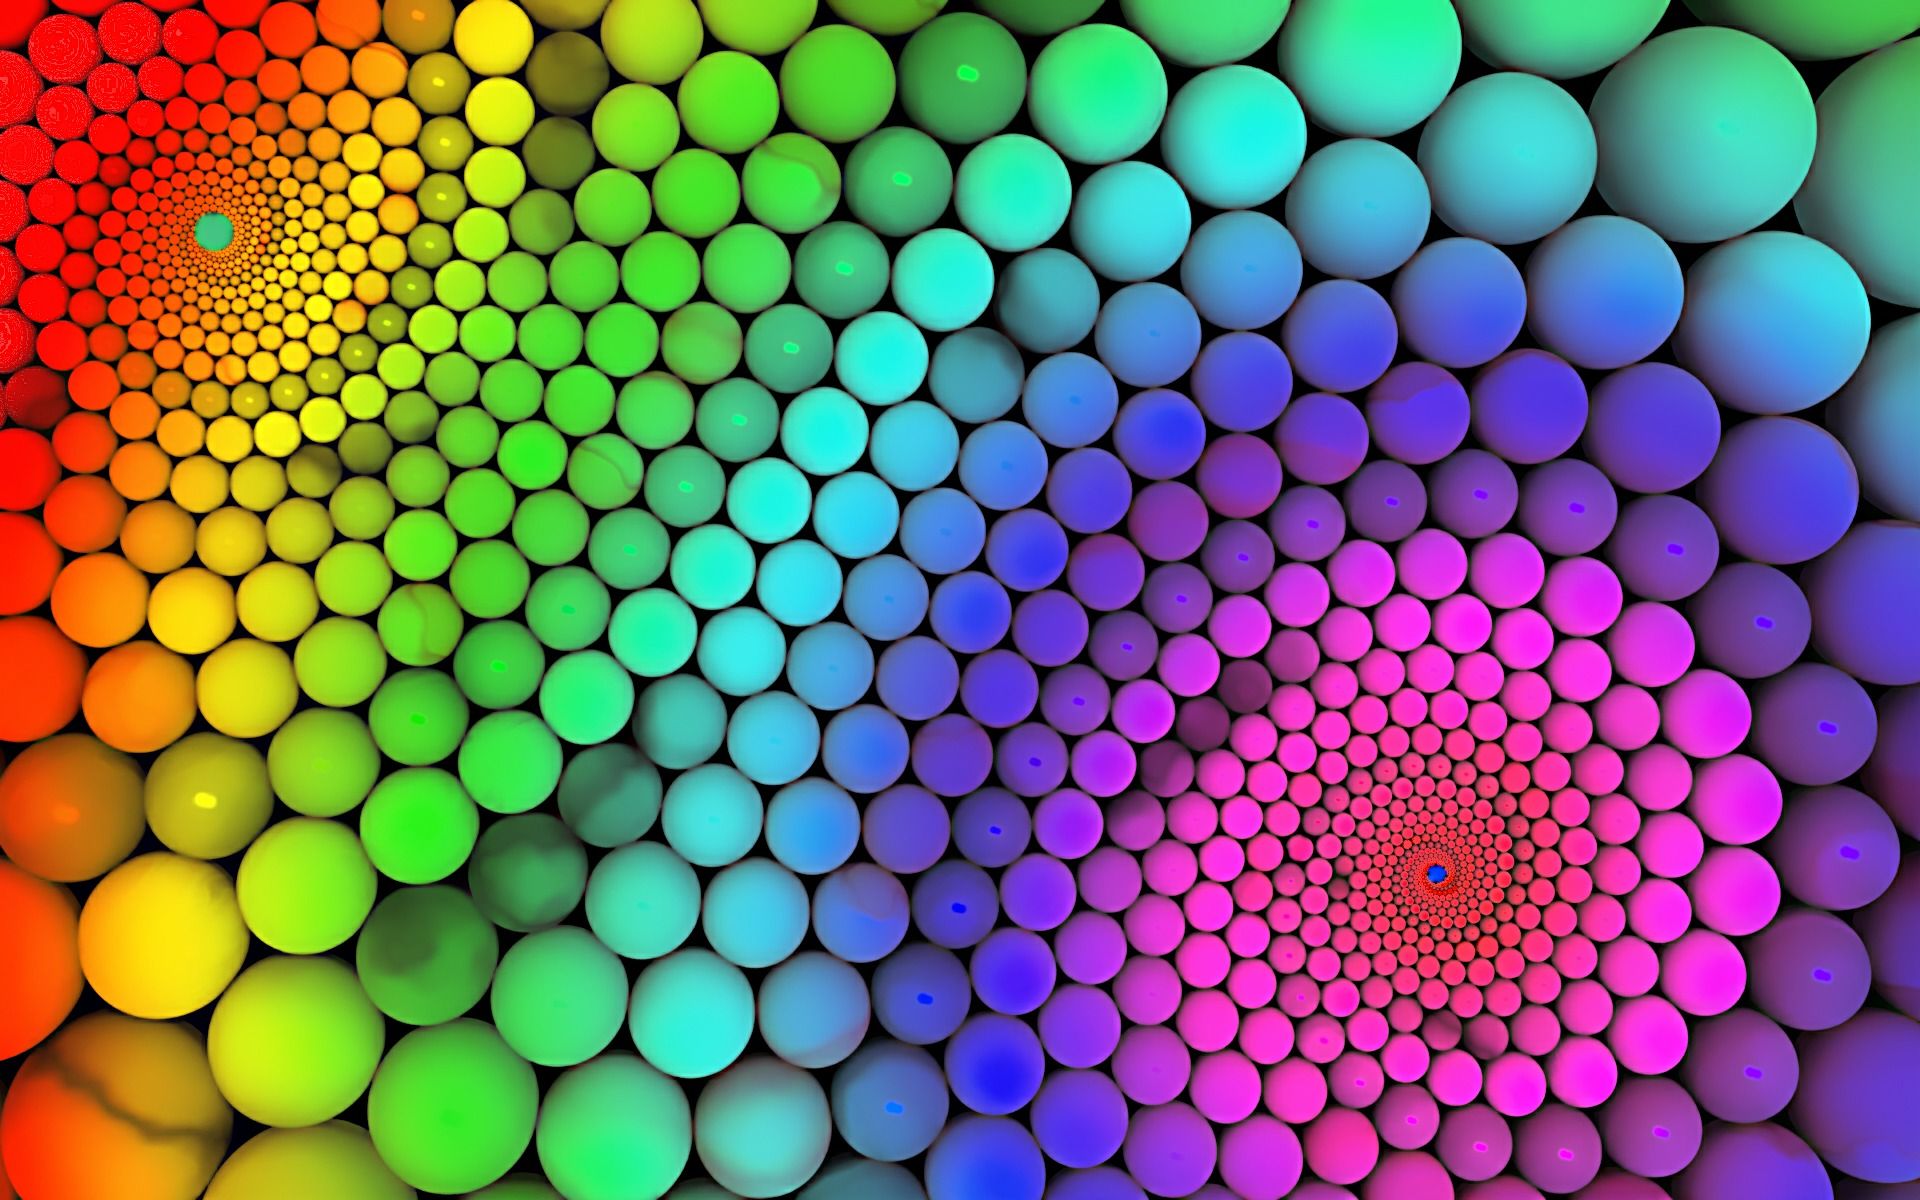 desktop wallpaper collections,circle,colorfulness,pattern,symmetry,psychedelic art